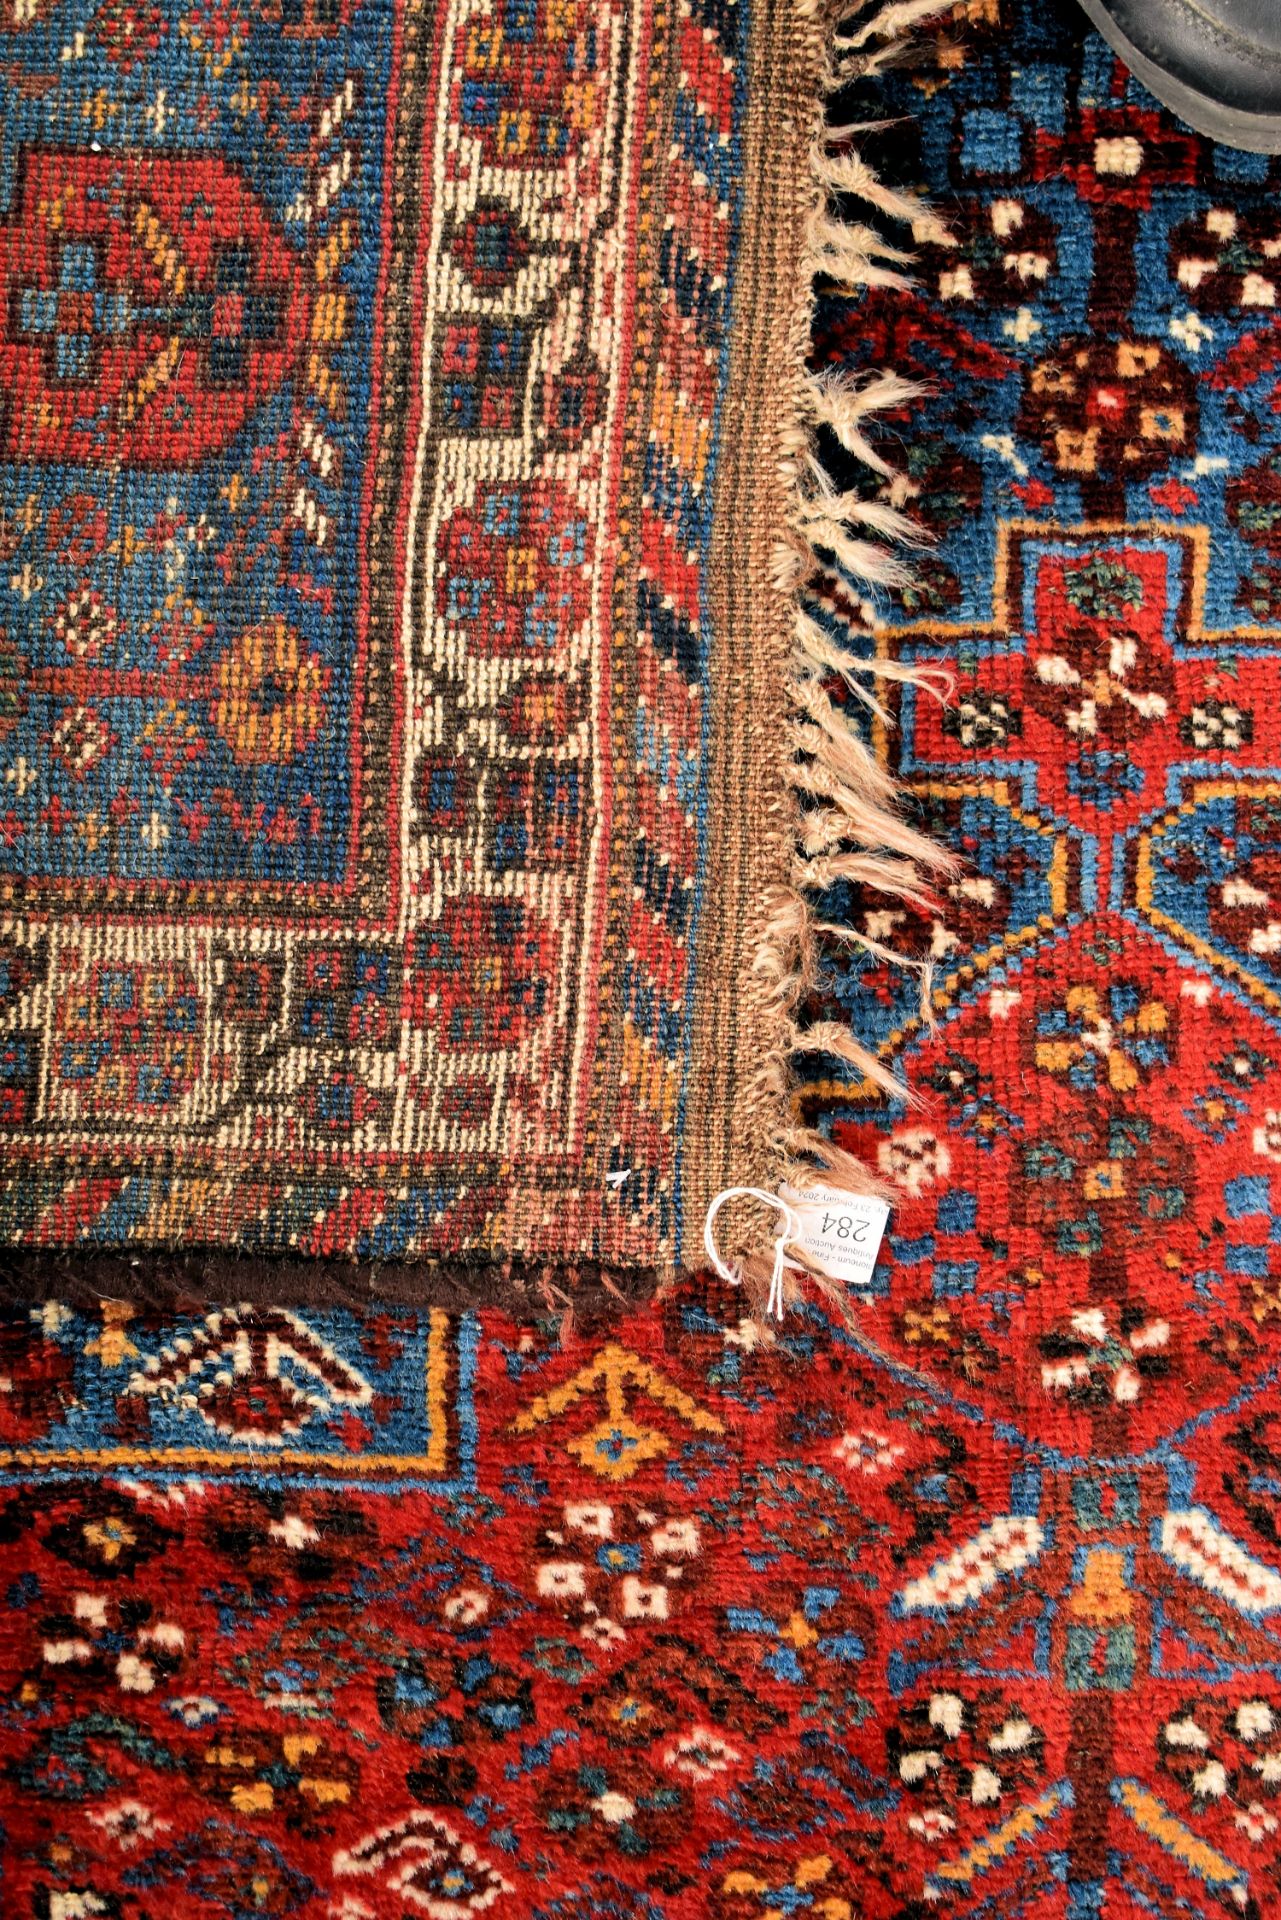 LARGE 20TH CENTURY AZERI PERSIAN HAND KNOTTED RUG - Image 4 of 5